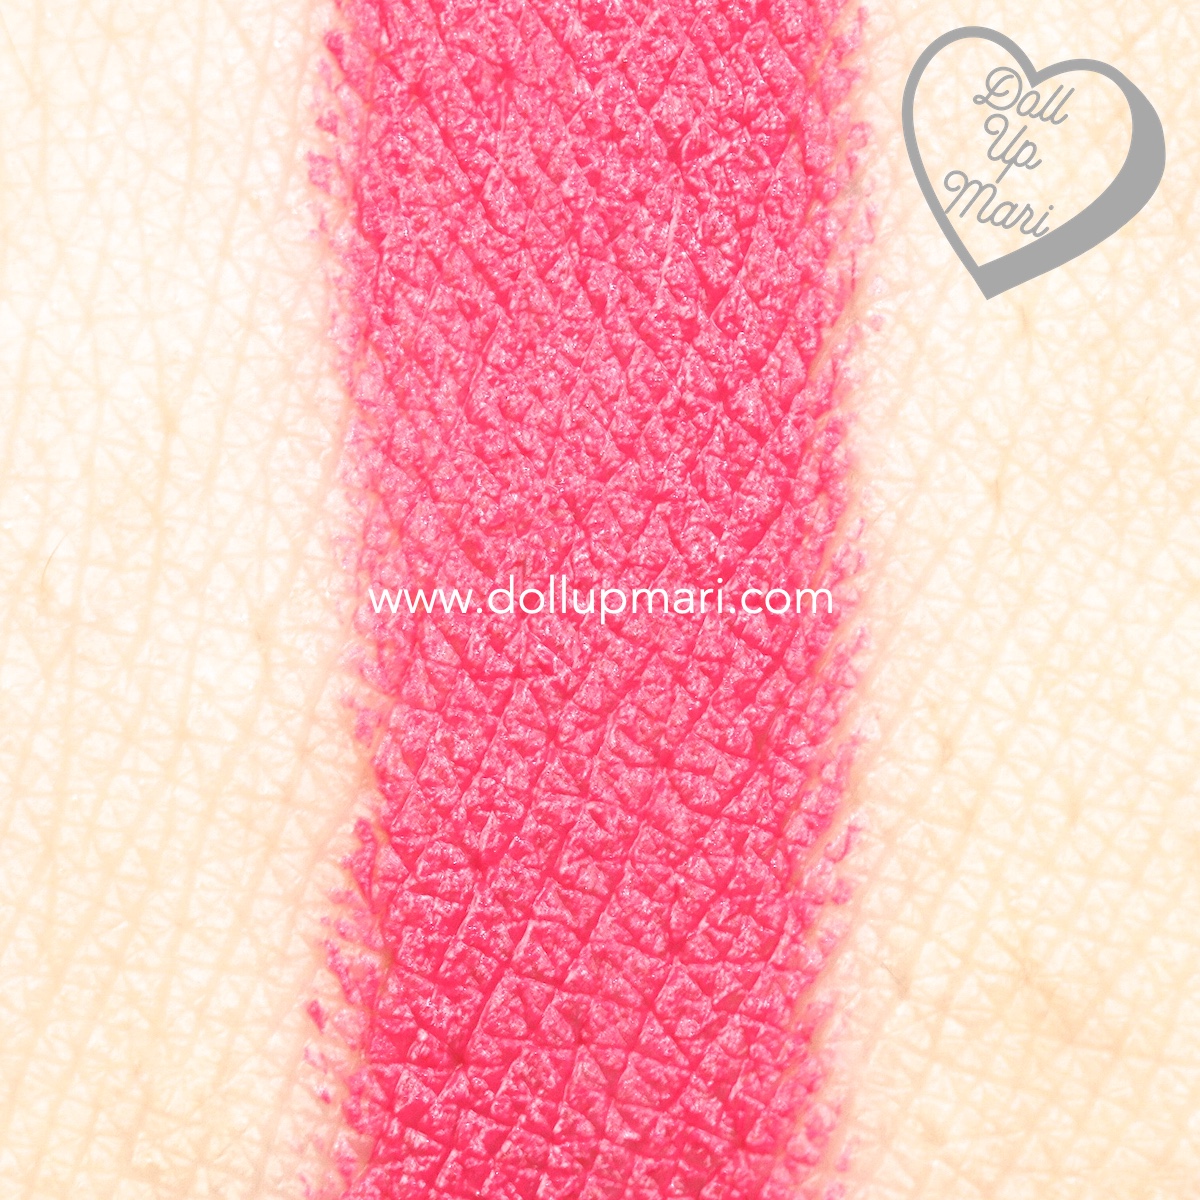 Swatch of Adoring Love shade of AVON Perfectly Matte Lipstick